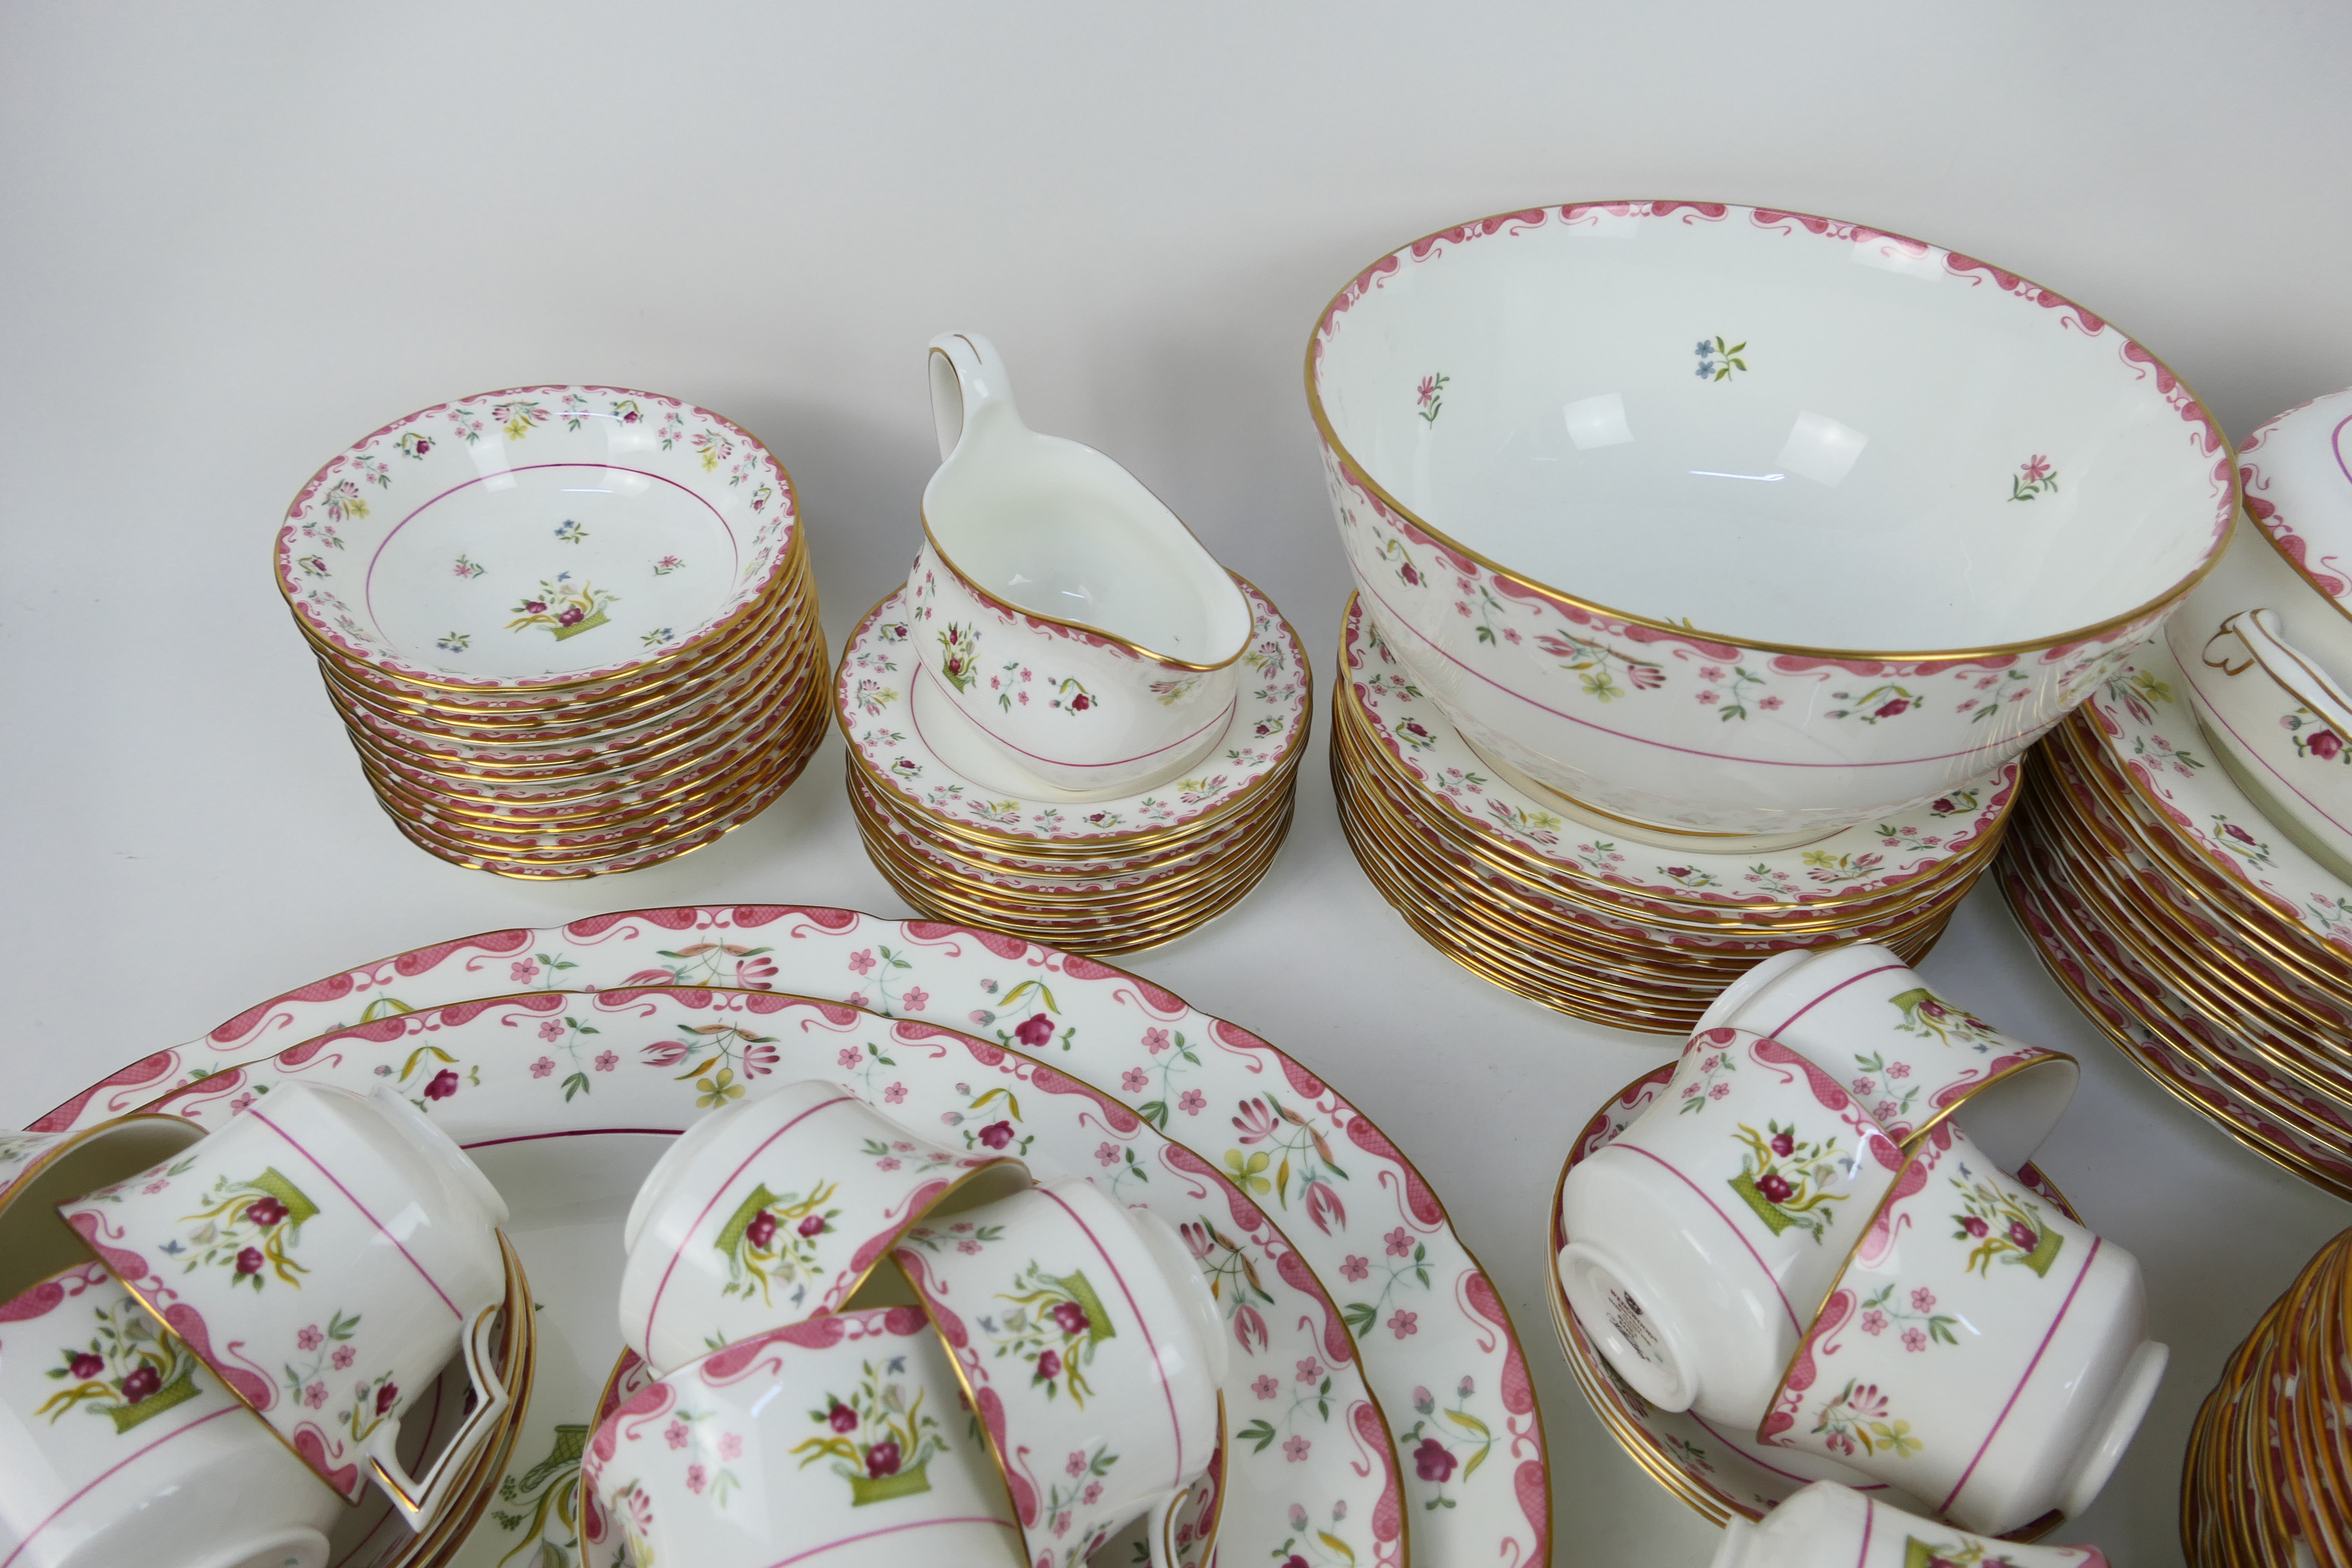 Wedgwood - A collection of dinner and tea wares in the Bianca pattern # R4499, - Image 4 of 5